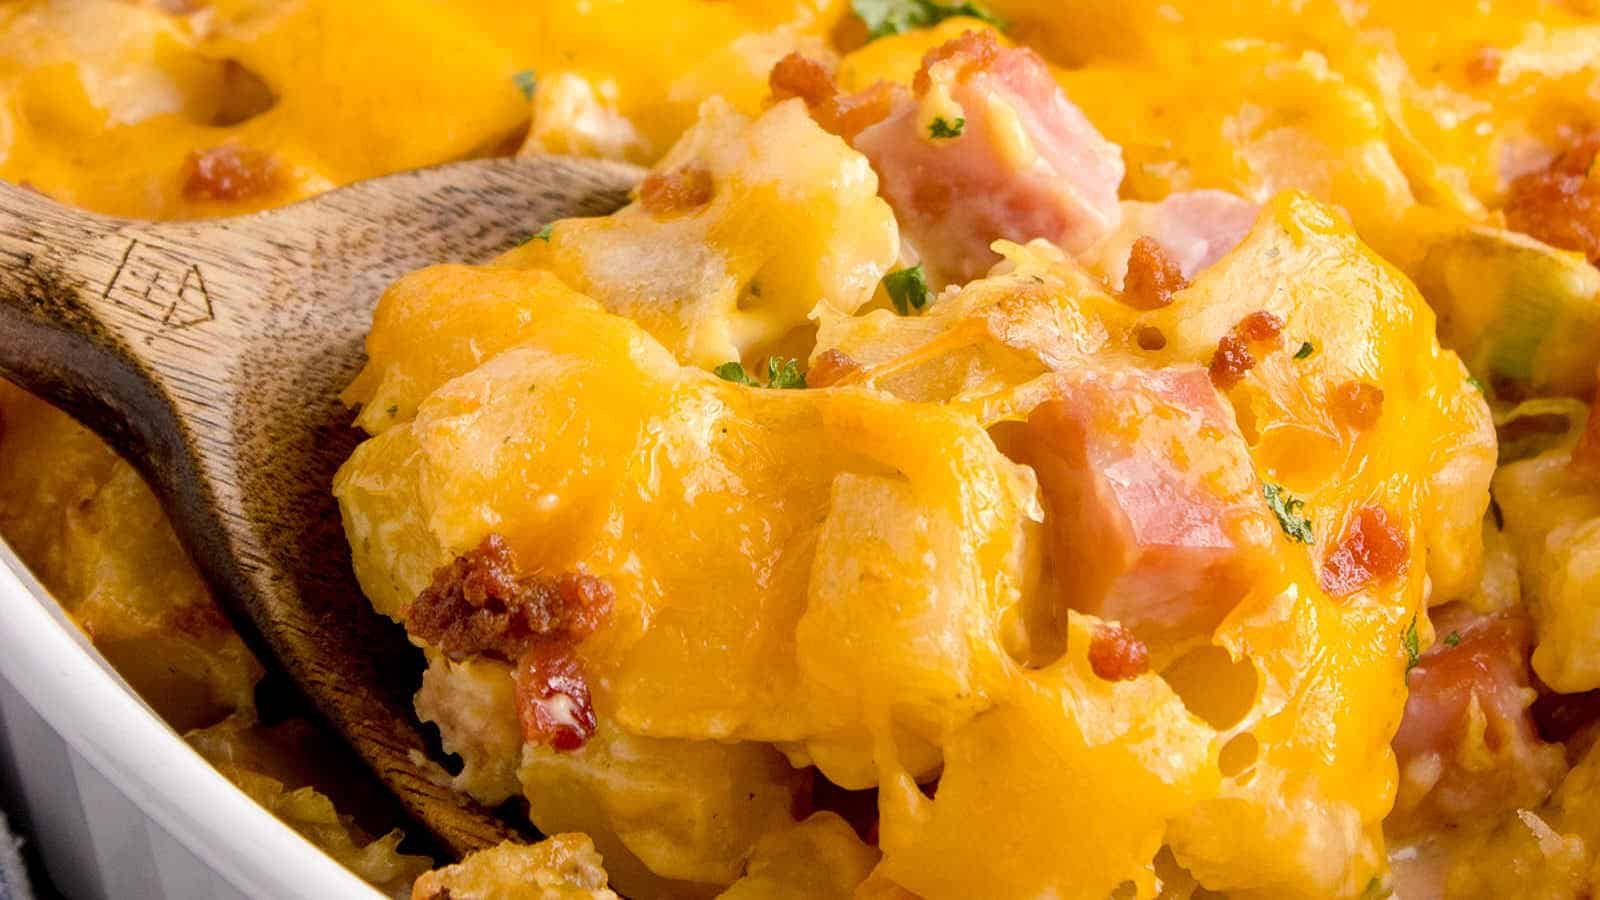 Ham and Cheese Casserole recipe by Cheerful Cook.